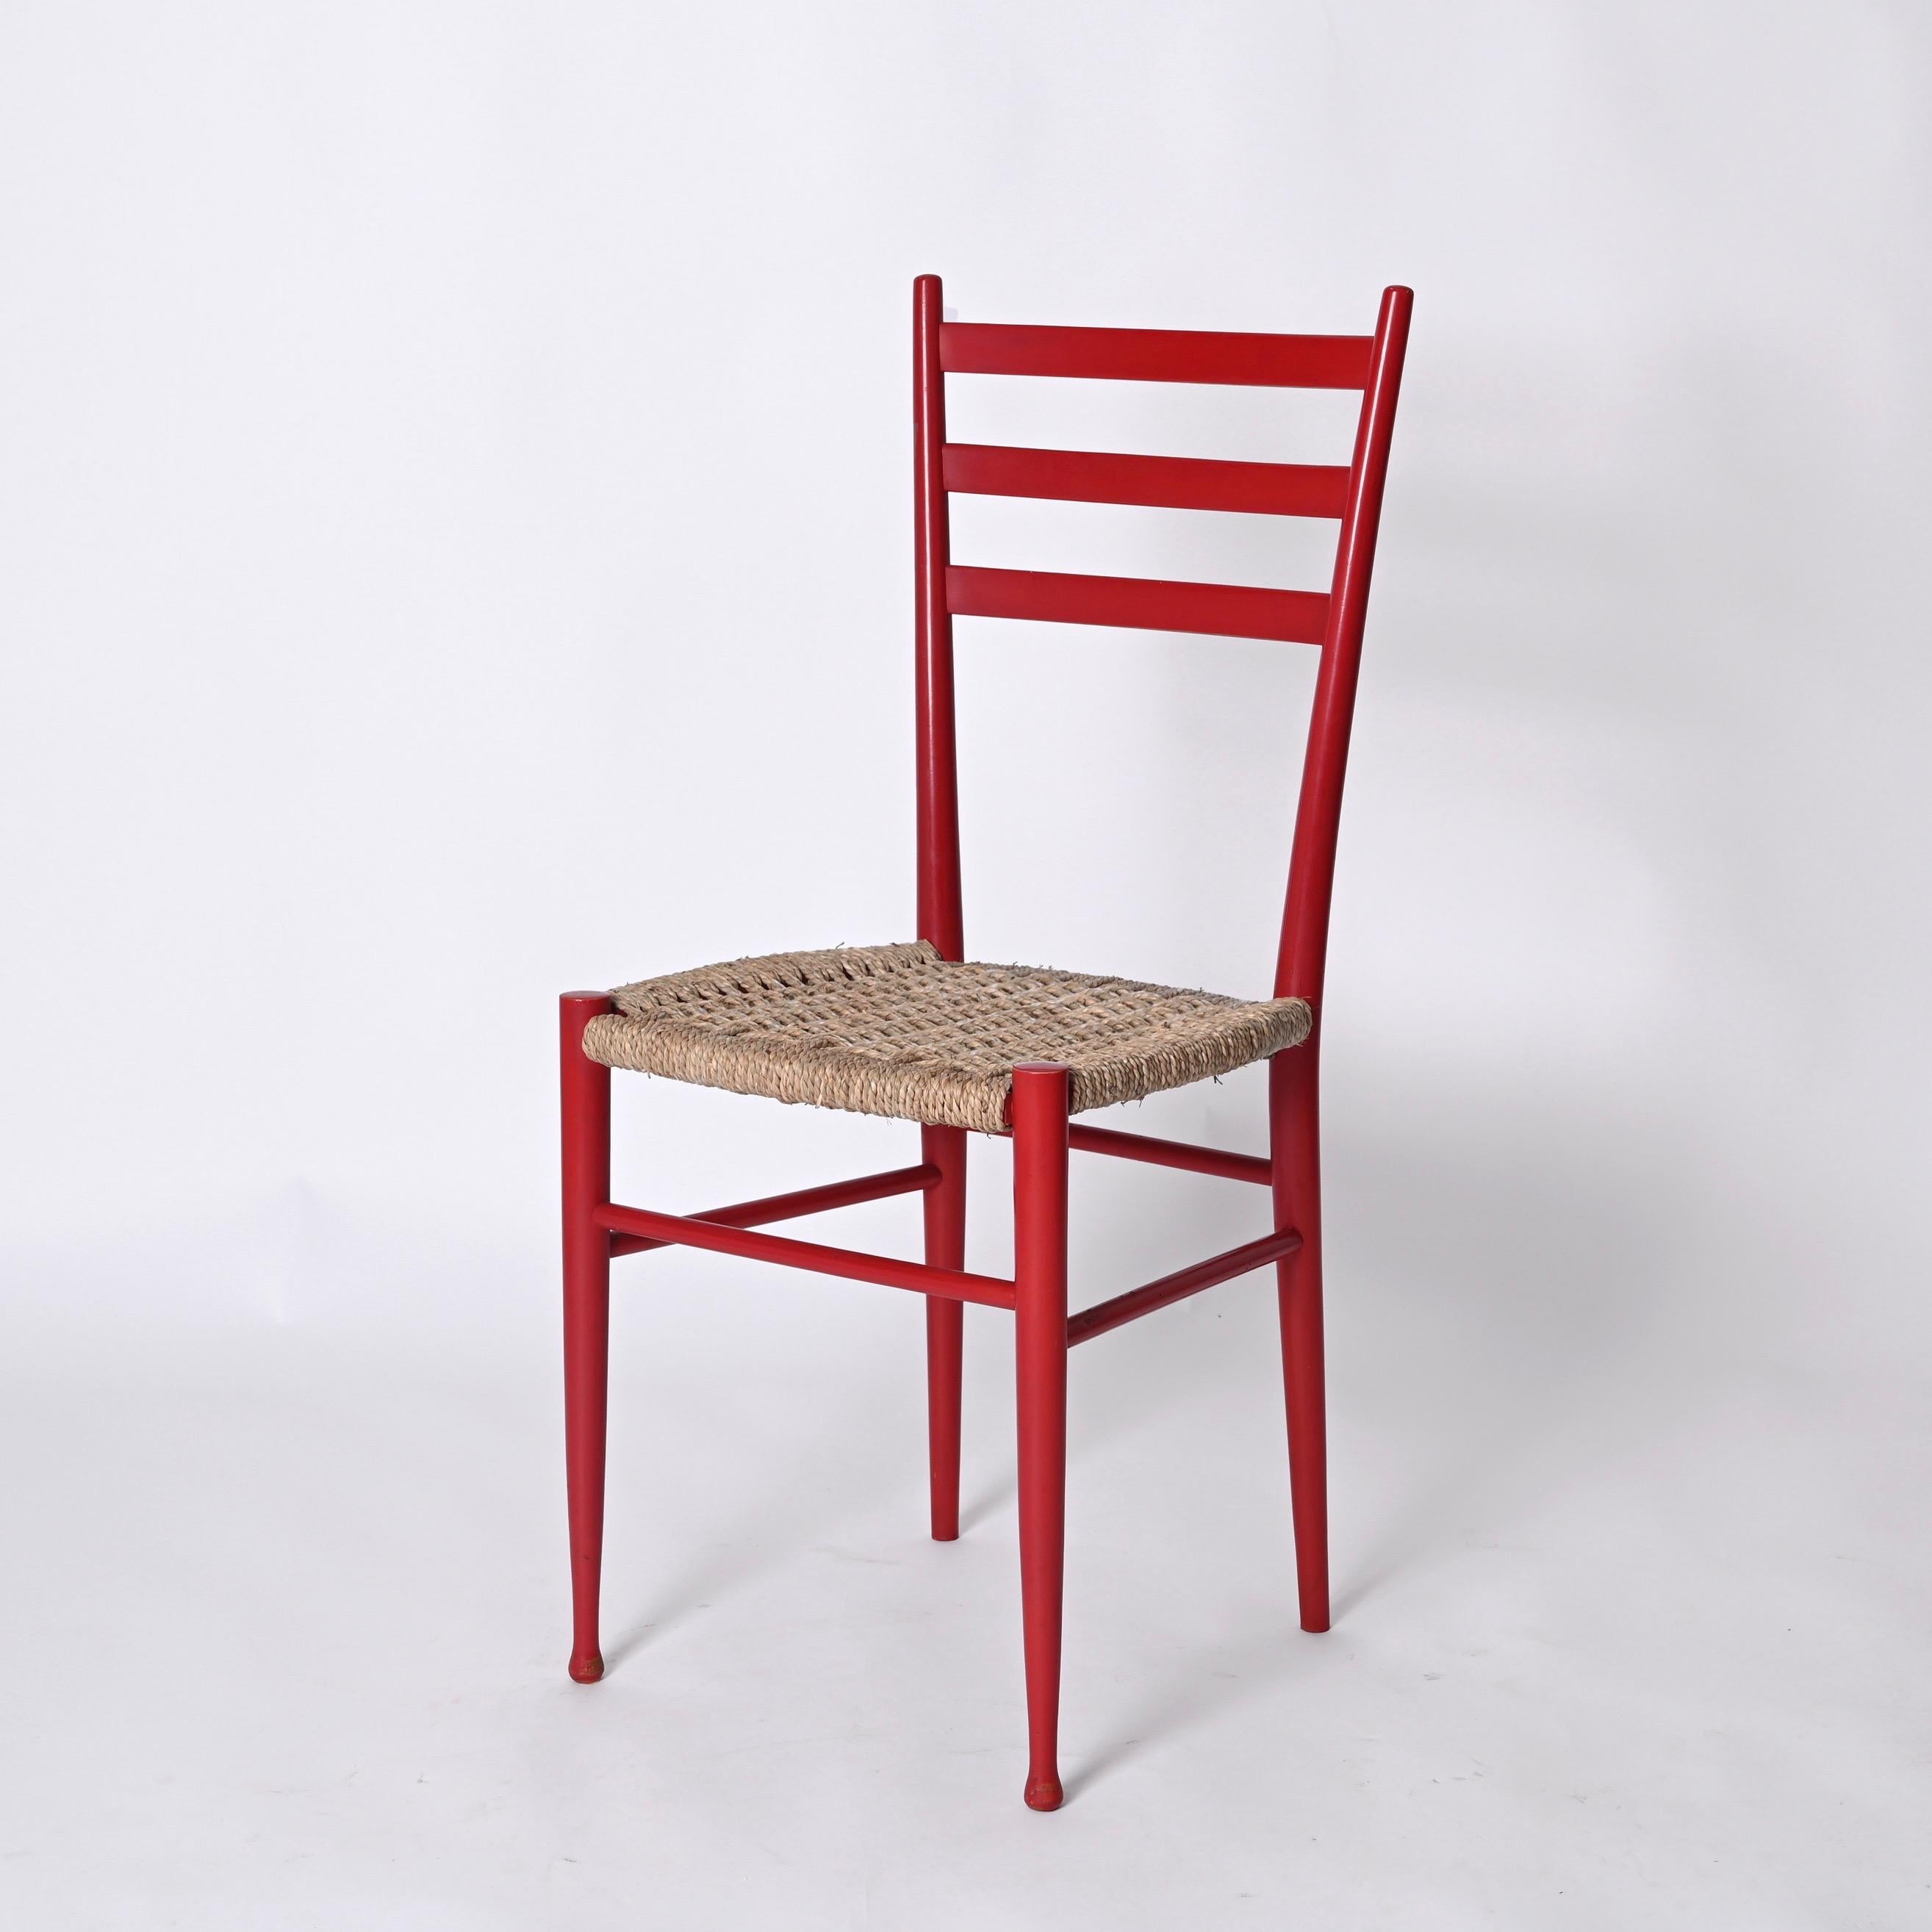 Mid-Century Modern Set of 4 Chiavarine Chairs in Red Stained Beech and Bamboo Rope, Italy 1950s For Sale